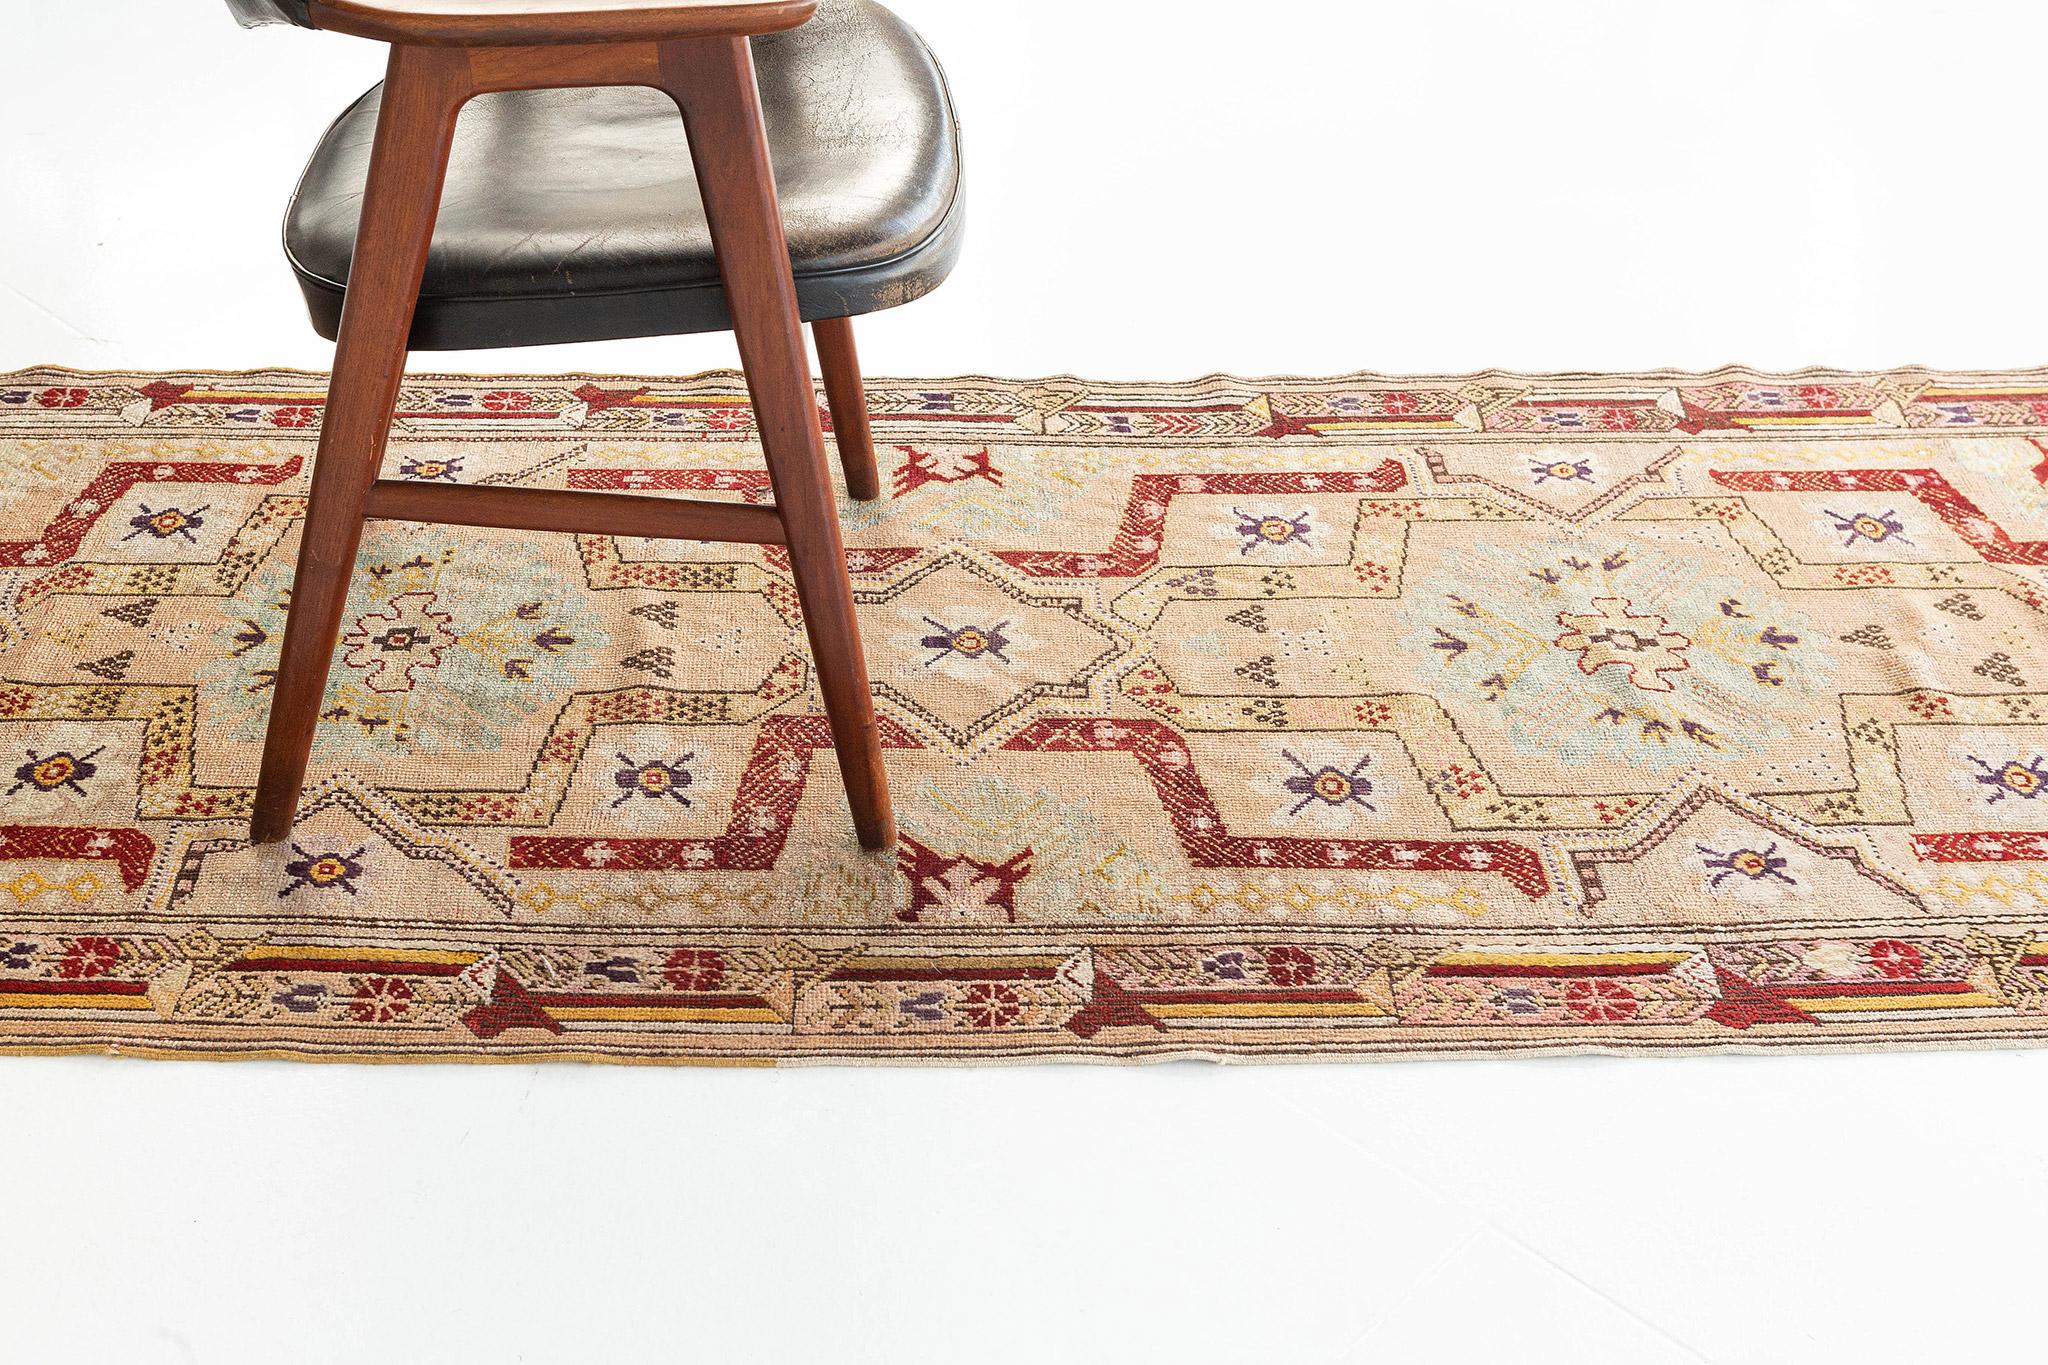 Emanating sophistication and glamour, this Vintage Turkish Anatolian runner provides an elegant and genteel design aesthetic with soft subtle hues. Four interconnected cusped medallions anchored with delicate palmette pendants floats in an abrashed